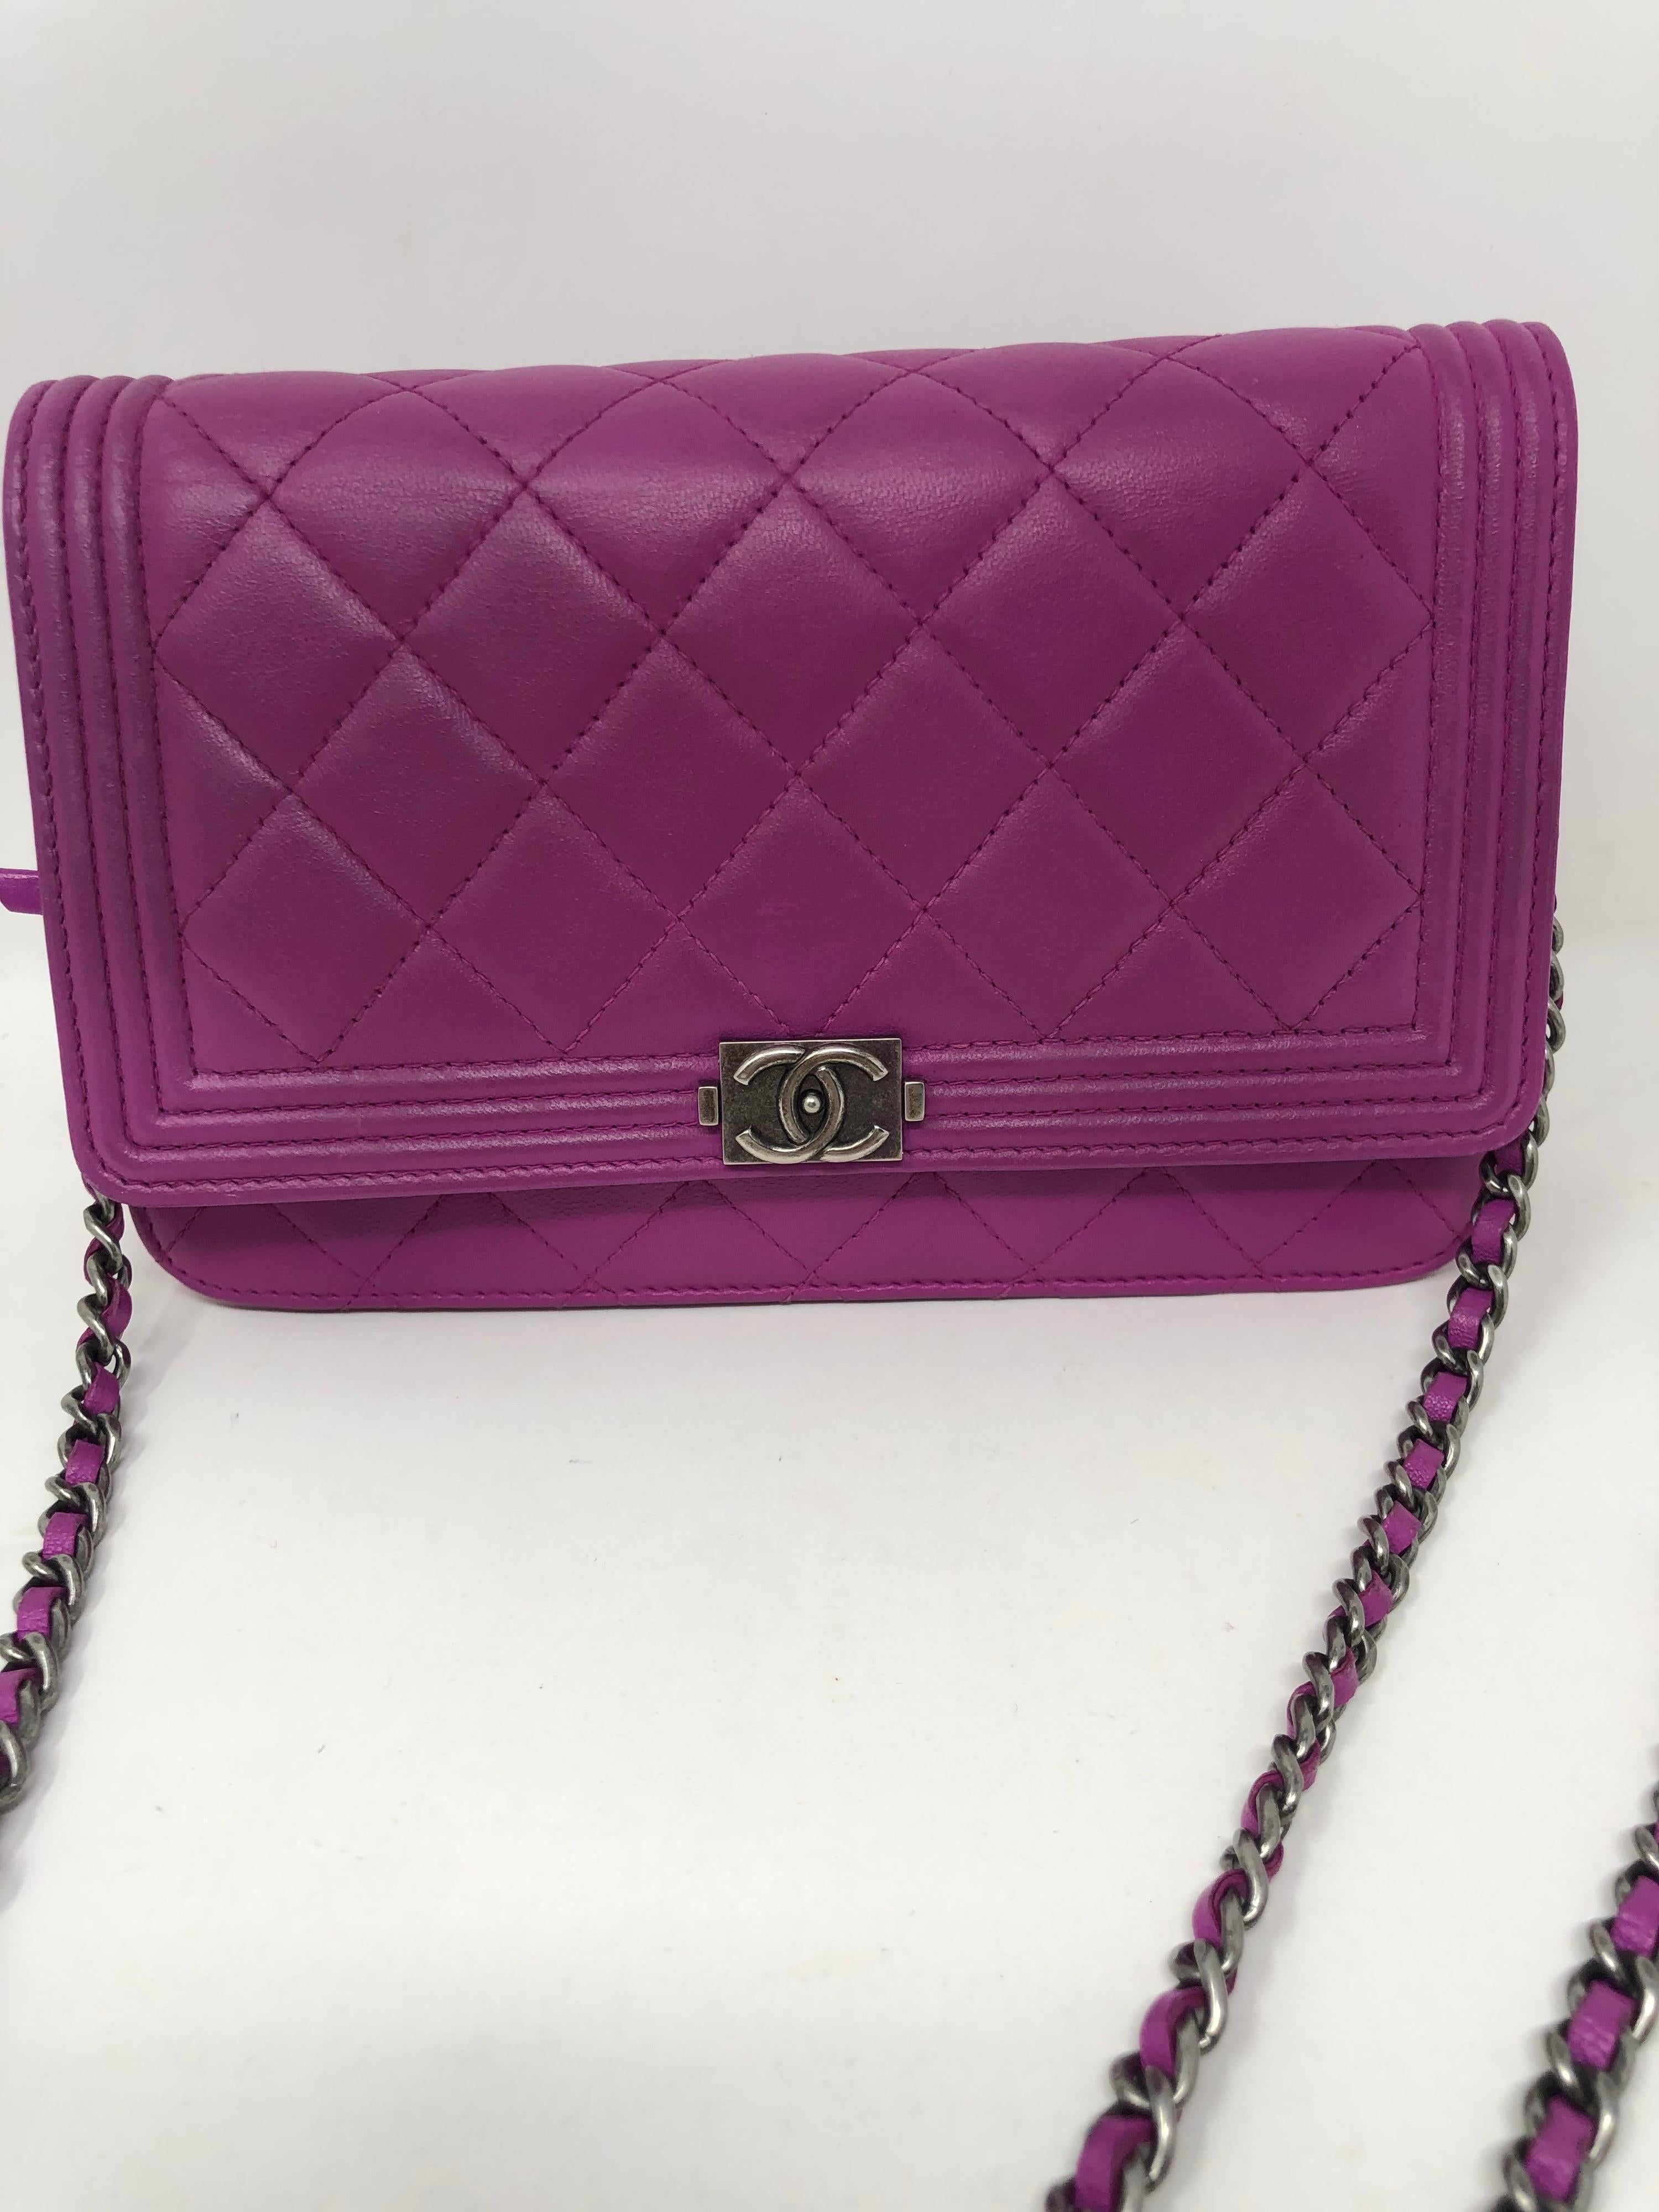 Chanel Boy Fuschia Wallet On A Chain Bag. Ruthenium hardware. Excellent condition. Crossbody or clutch. Includes dust cover. Guaranteed authentic. 